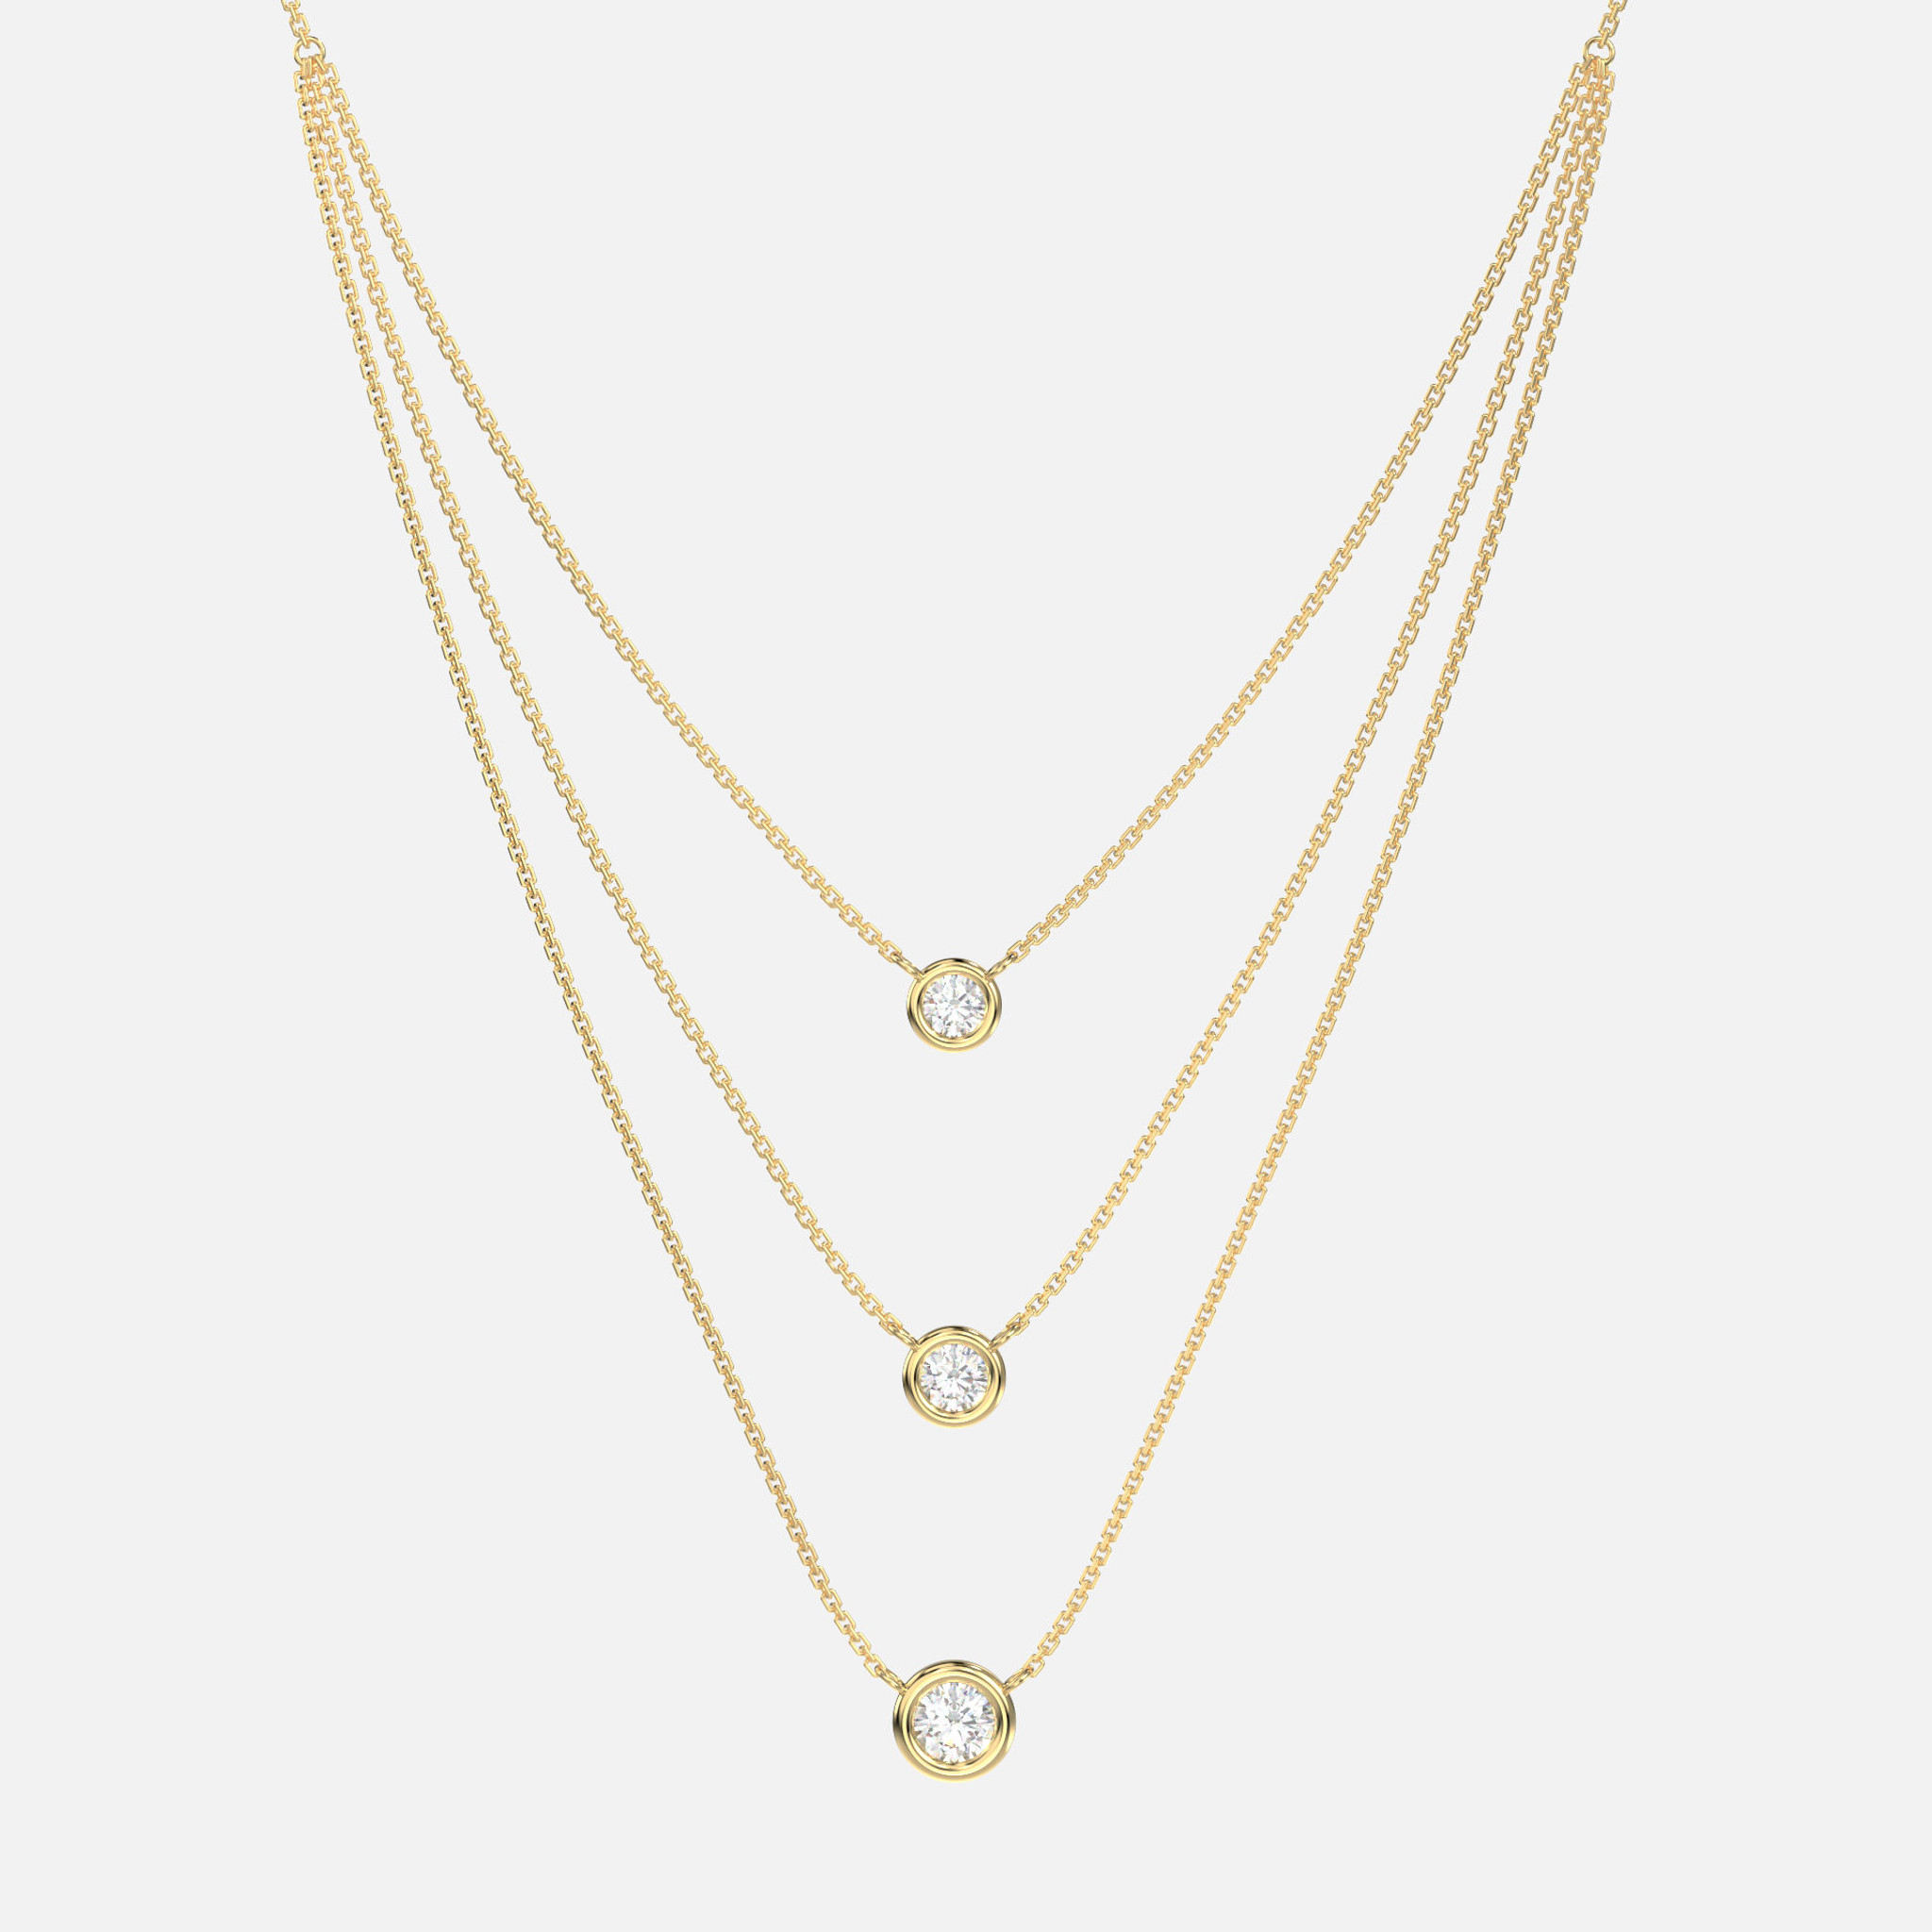 Embrace elegance with the luxurious Bezel Set Diamond Trio Necklace, carefully cast in lush 14k gold.